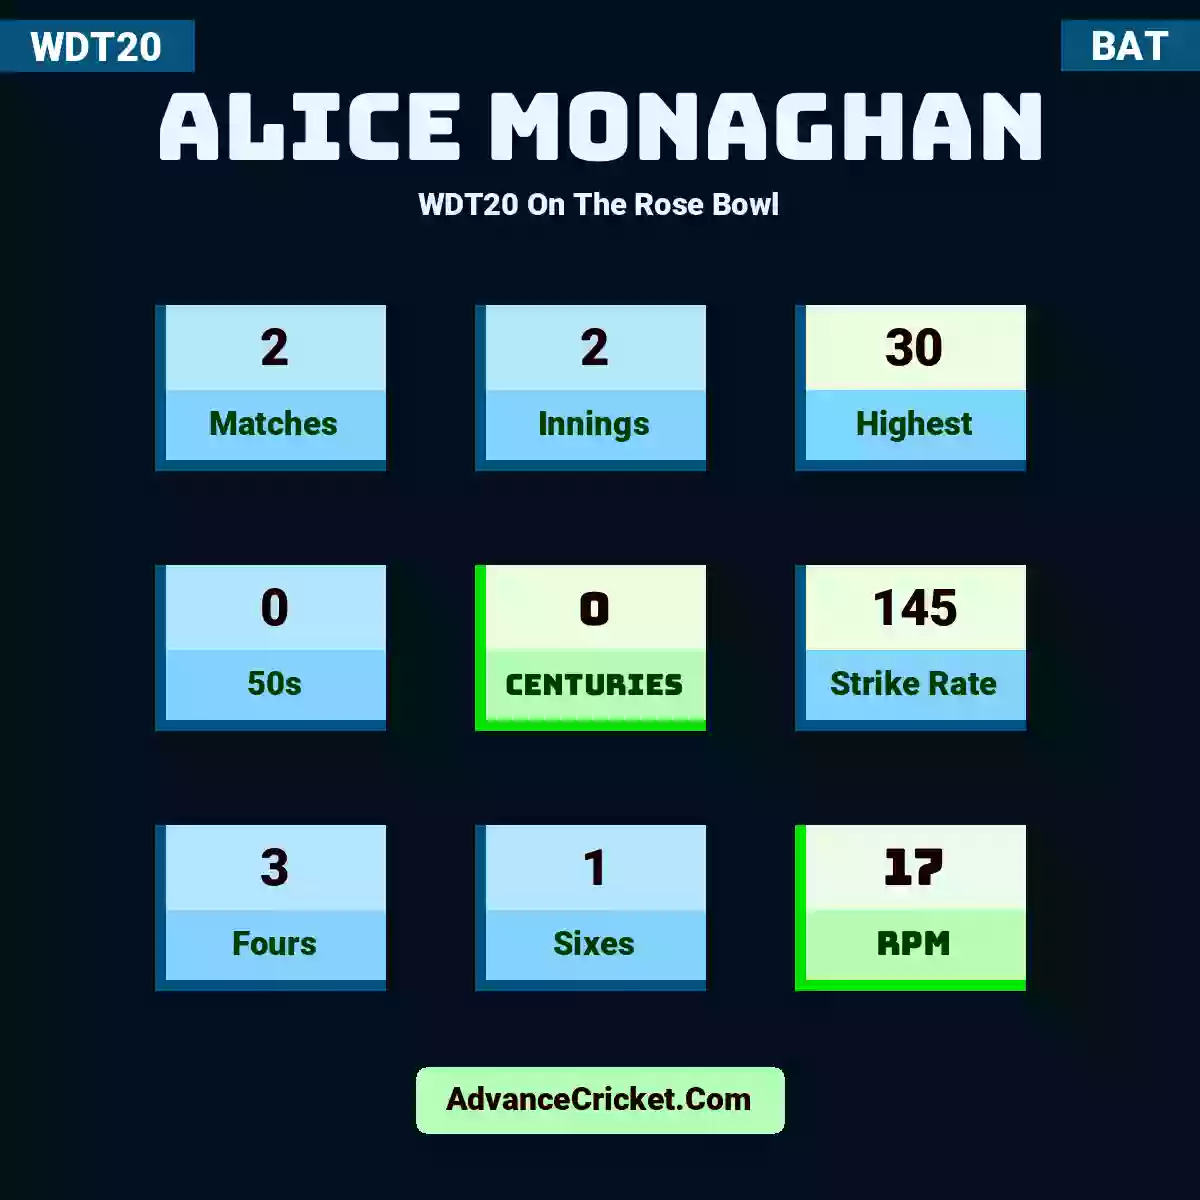 Alice Monaghan WDT20  On The Rose Bowl, Alice Monaghan played 2 matches, scored 30 runs as highest, 0 half-centuries, and 0 centuries, with a strike rate of 145. A.Monaghan hit 3 fours and 1 sixes, with an RPM of 17.